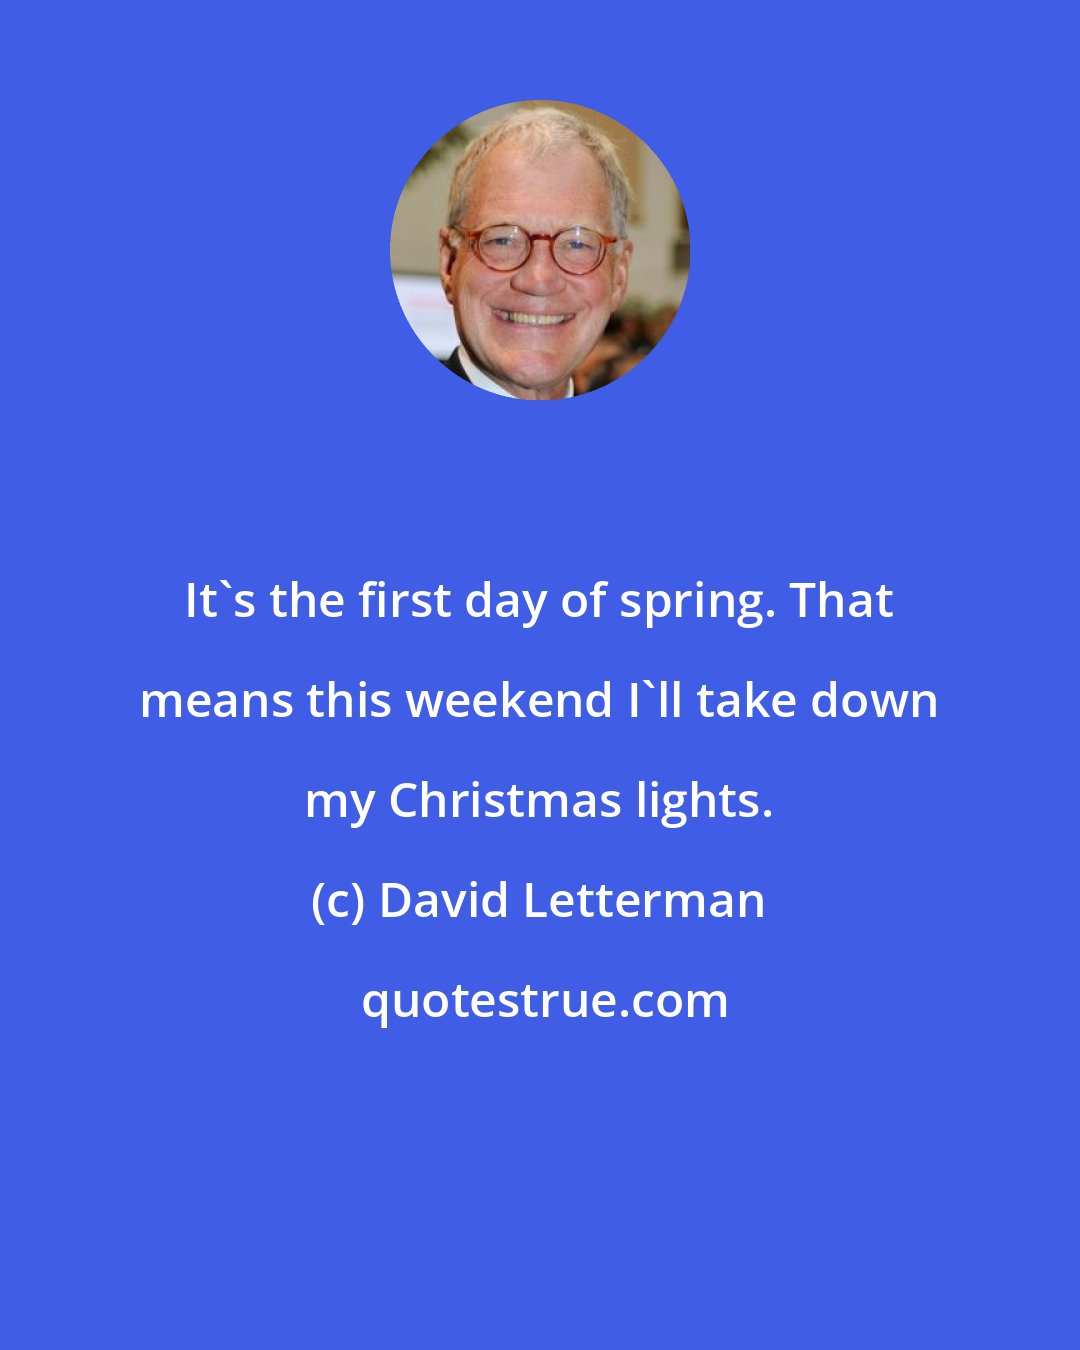 David Letterman: It's the first day of spring. That means this weekend I'll take down my Christmas lights.